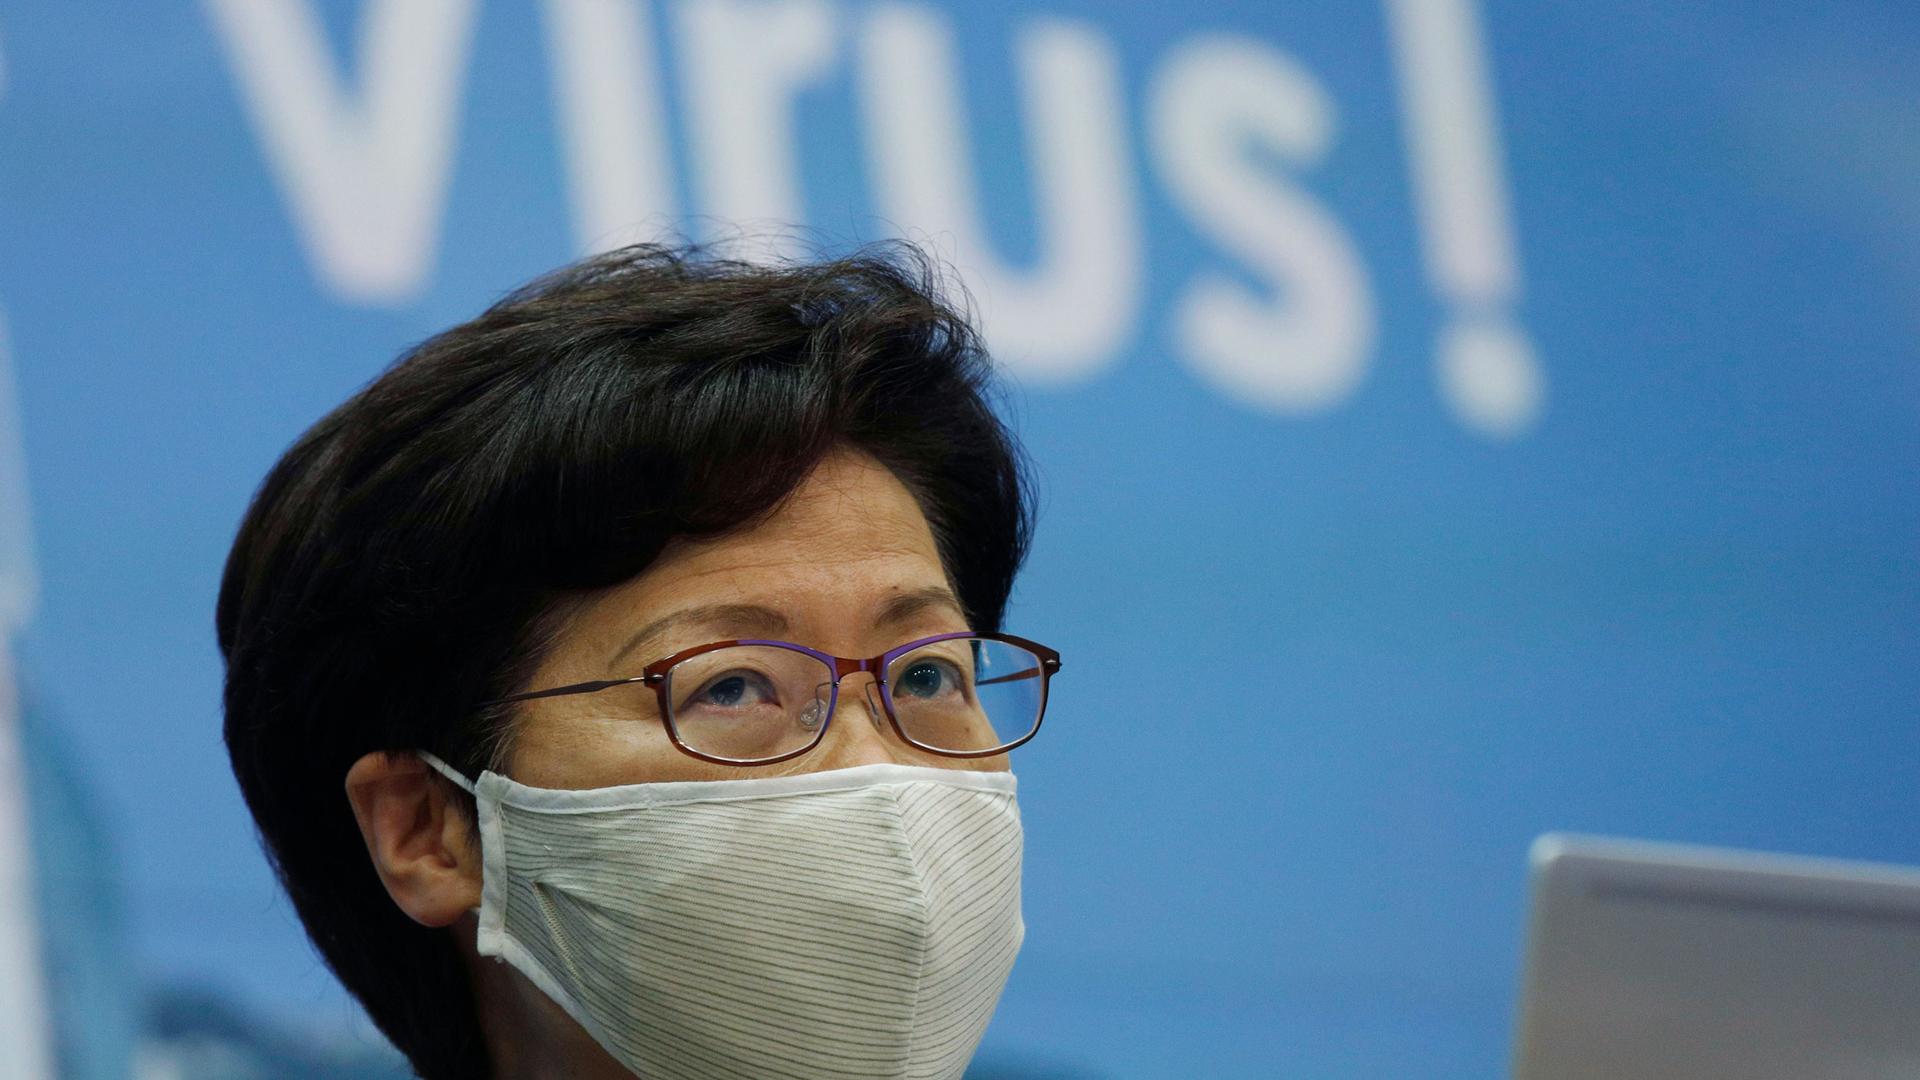 A close-up photograph of Hong Kong Chief Executive Carrie Lam who is shown wearing a face mask and glasses.